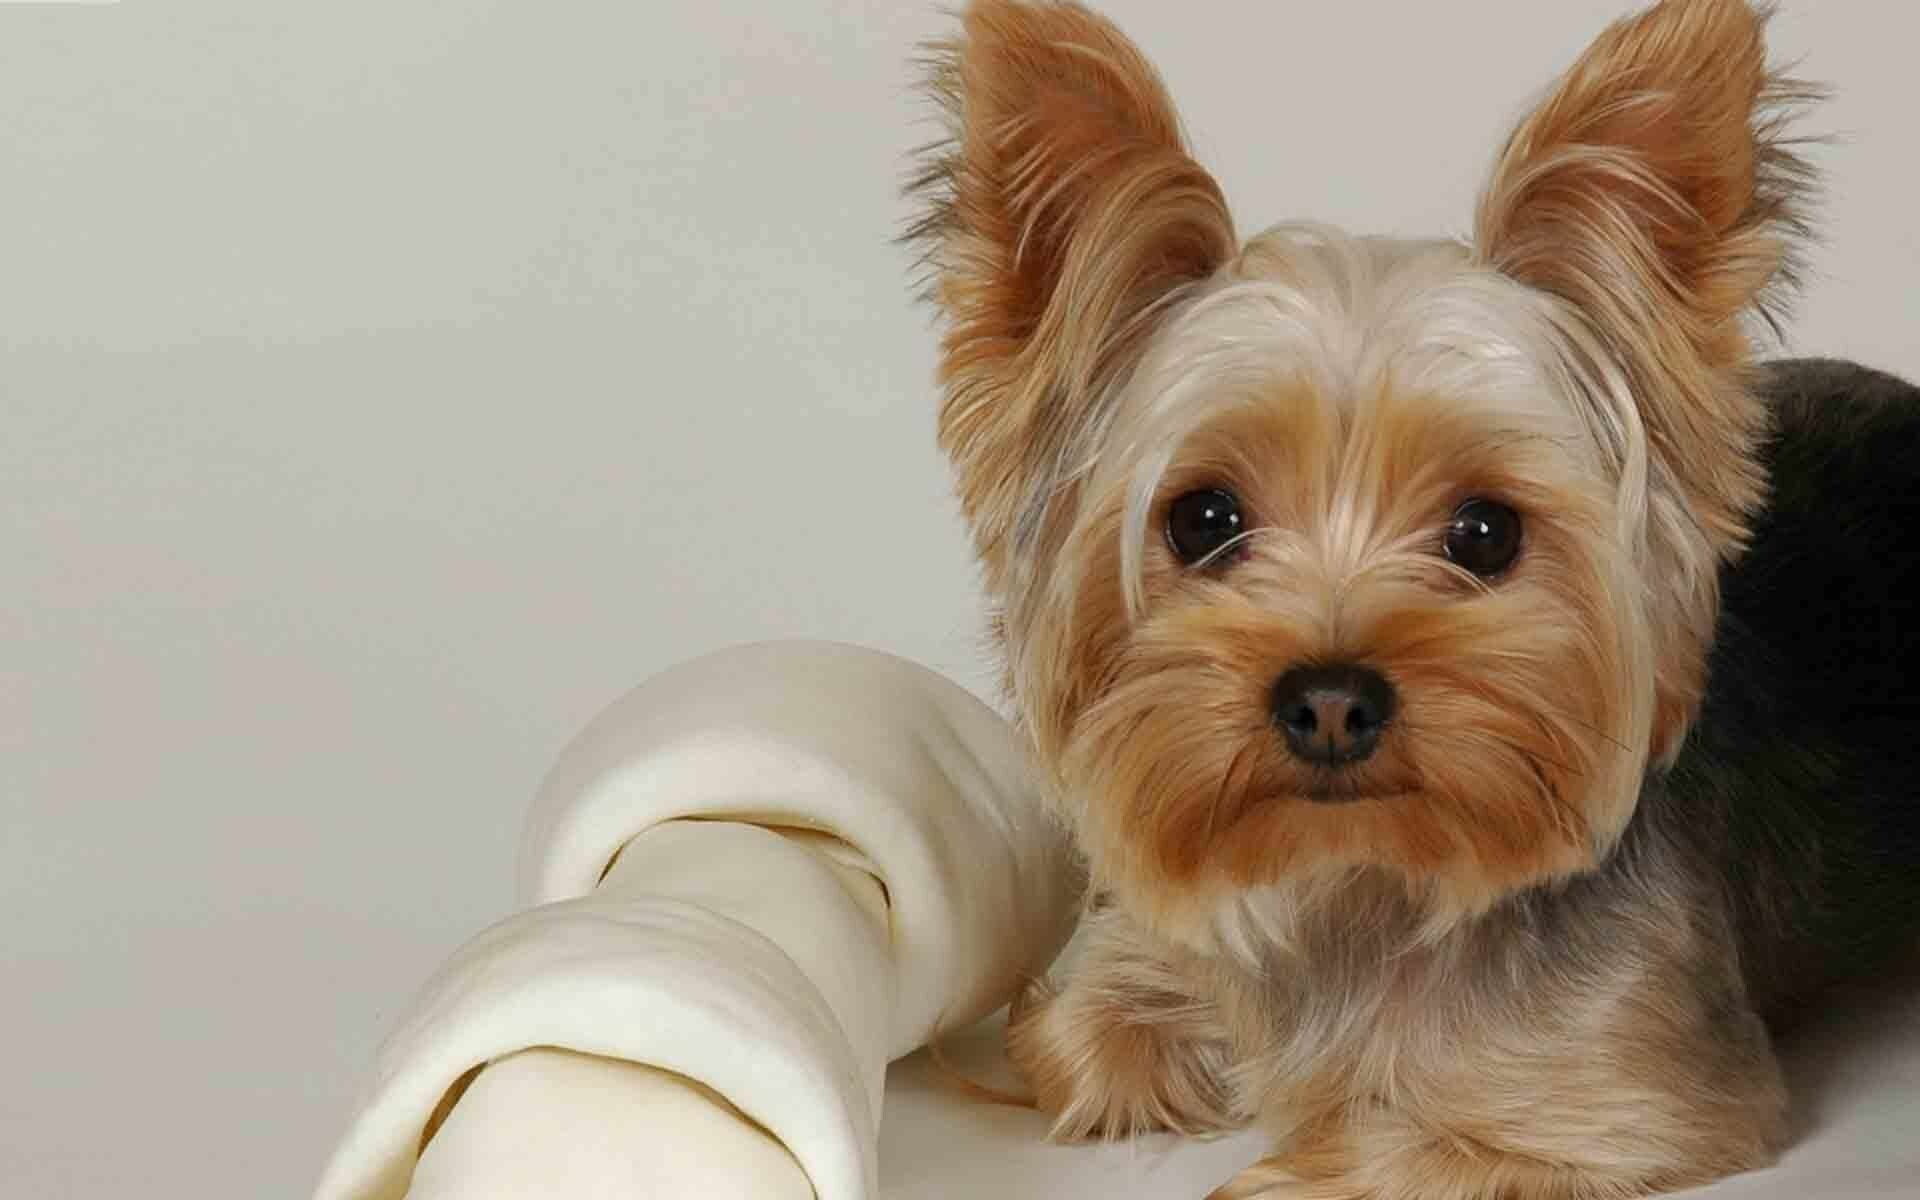 Yorkshire Terrier, Scary wallpapers, Dark and mysterious, Unique Yorkie images, 1920x1200 HD Desktop